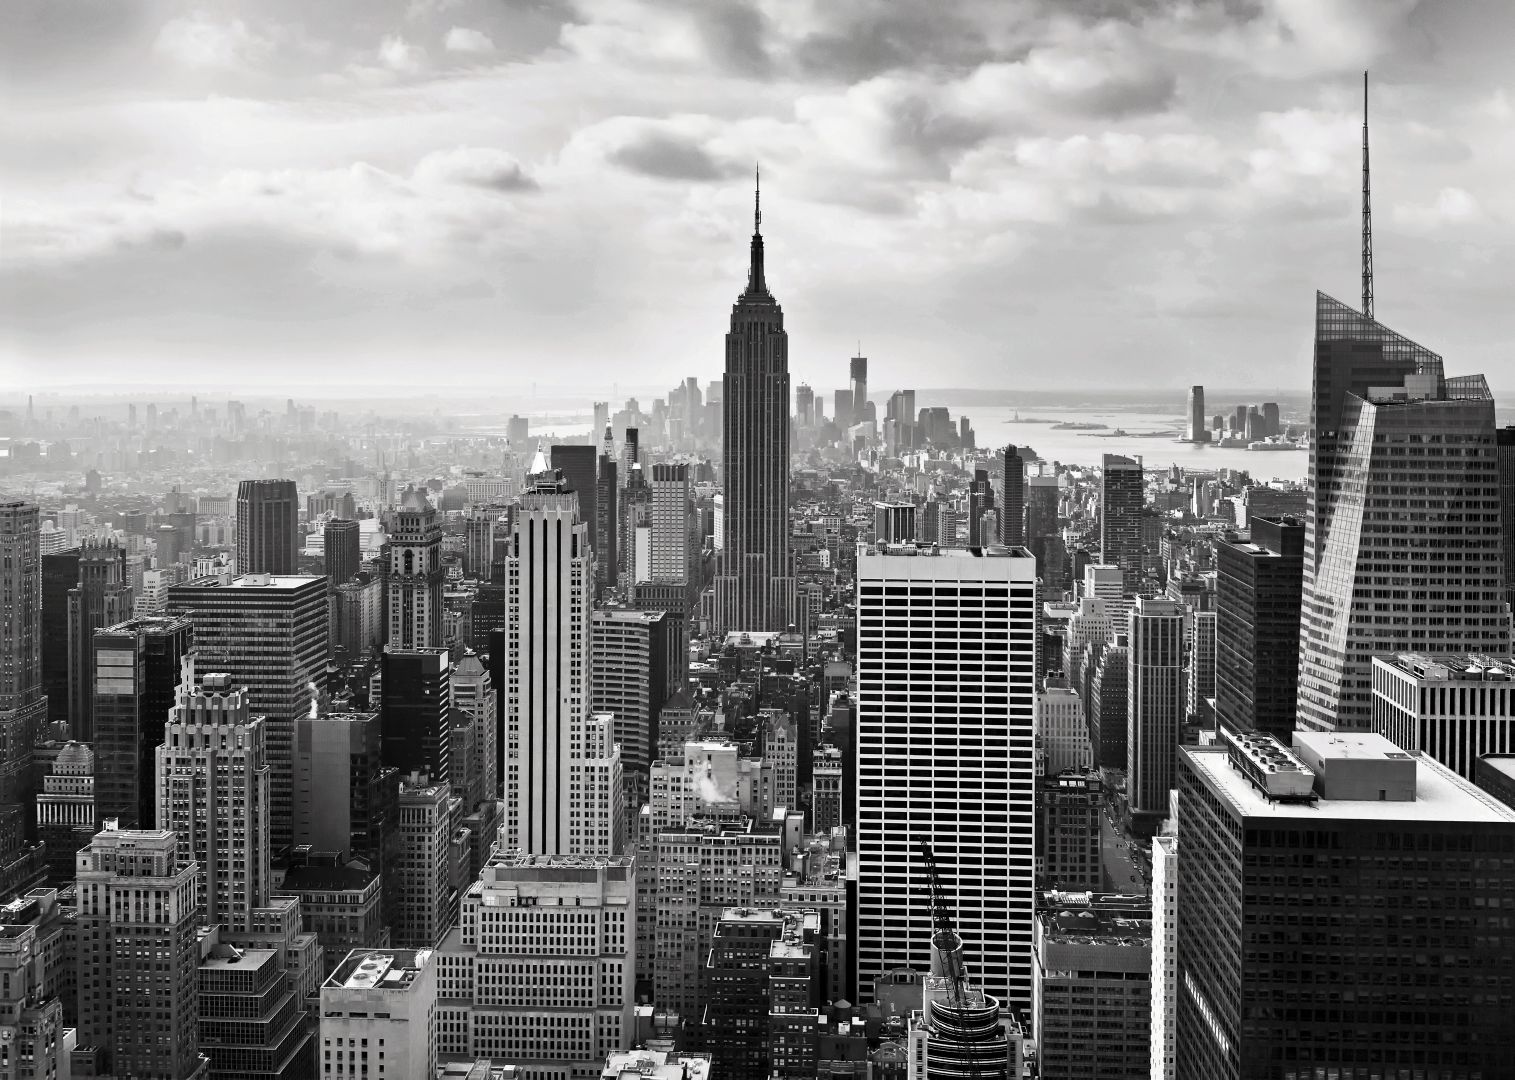 Wall Mural Photo Wallpaper New York City Black White Large Size